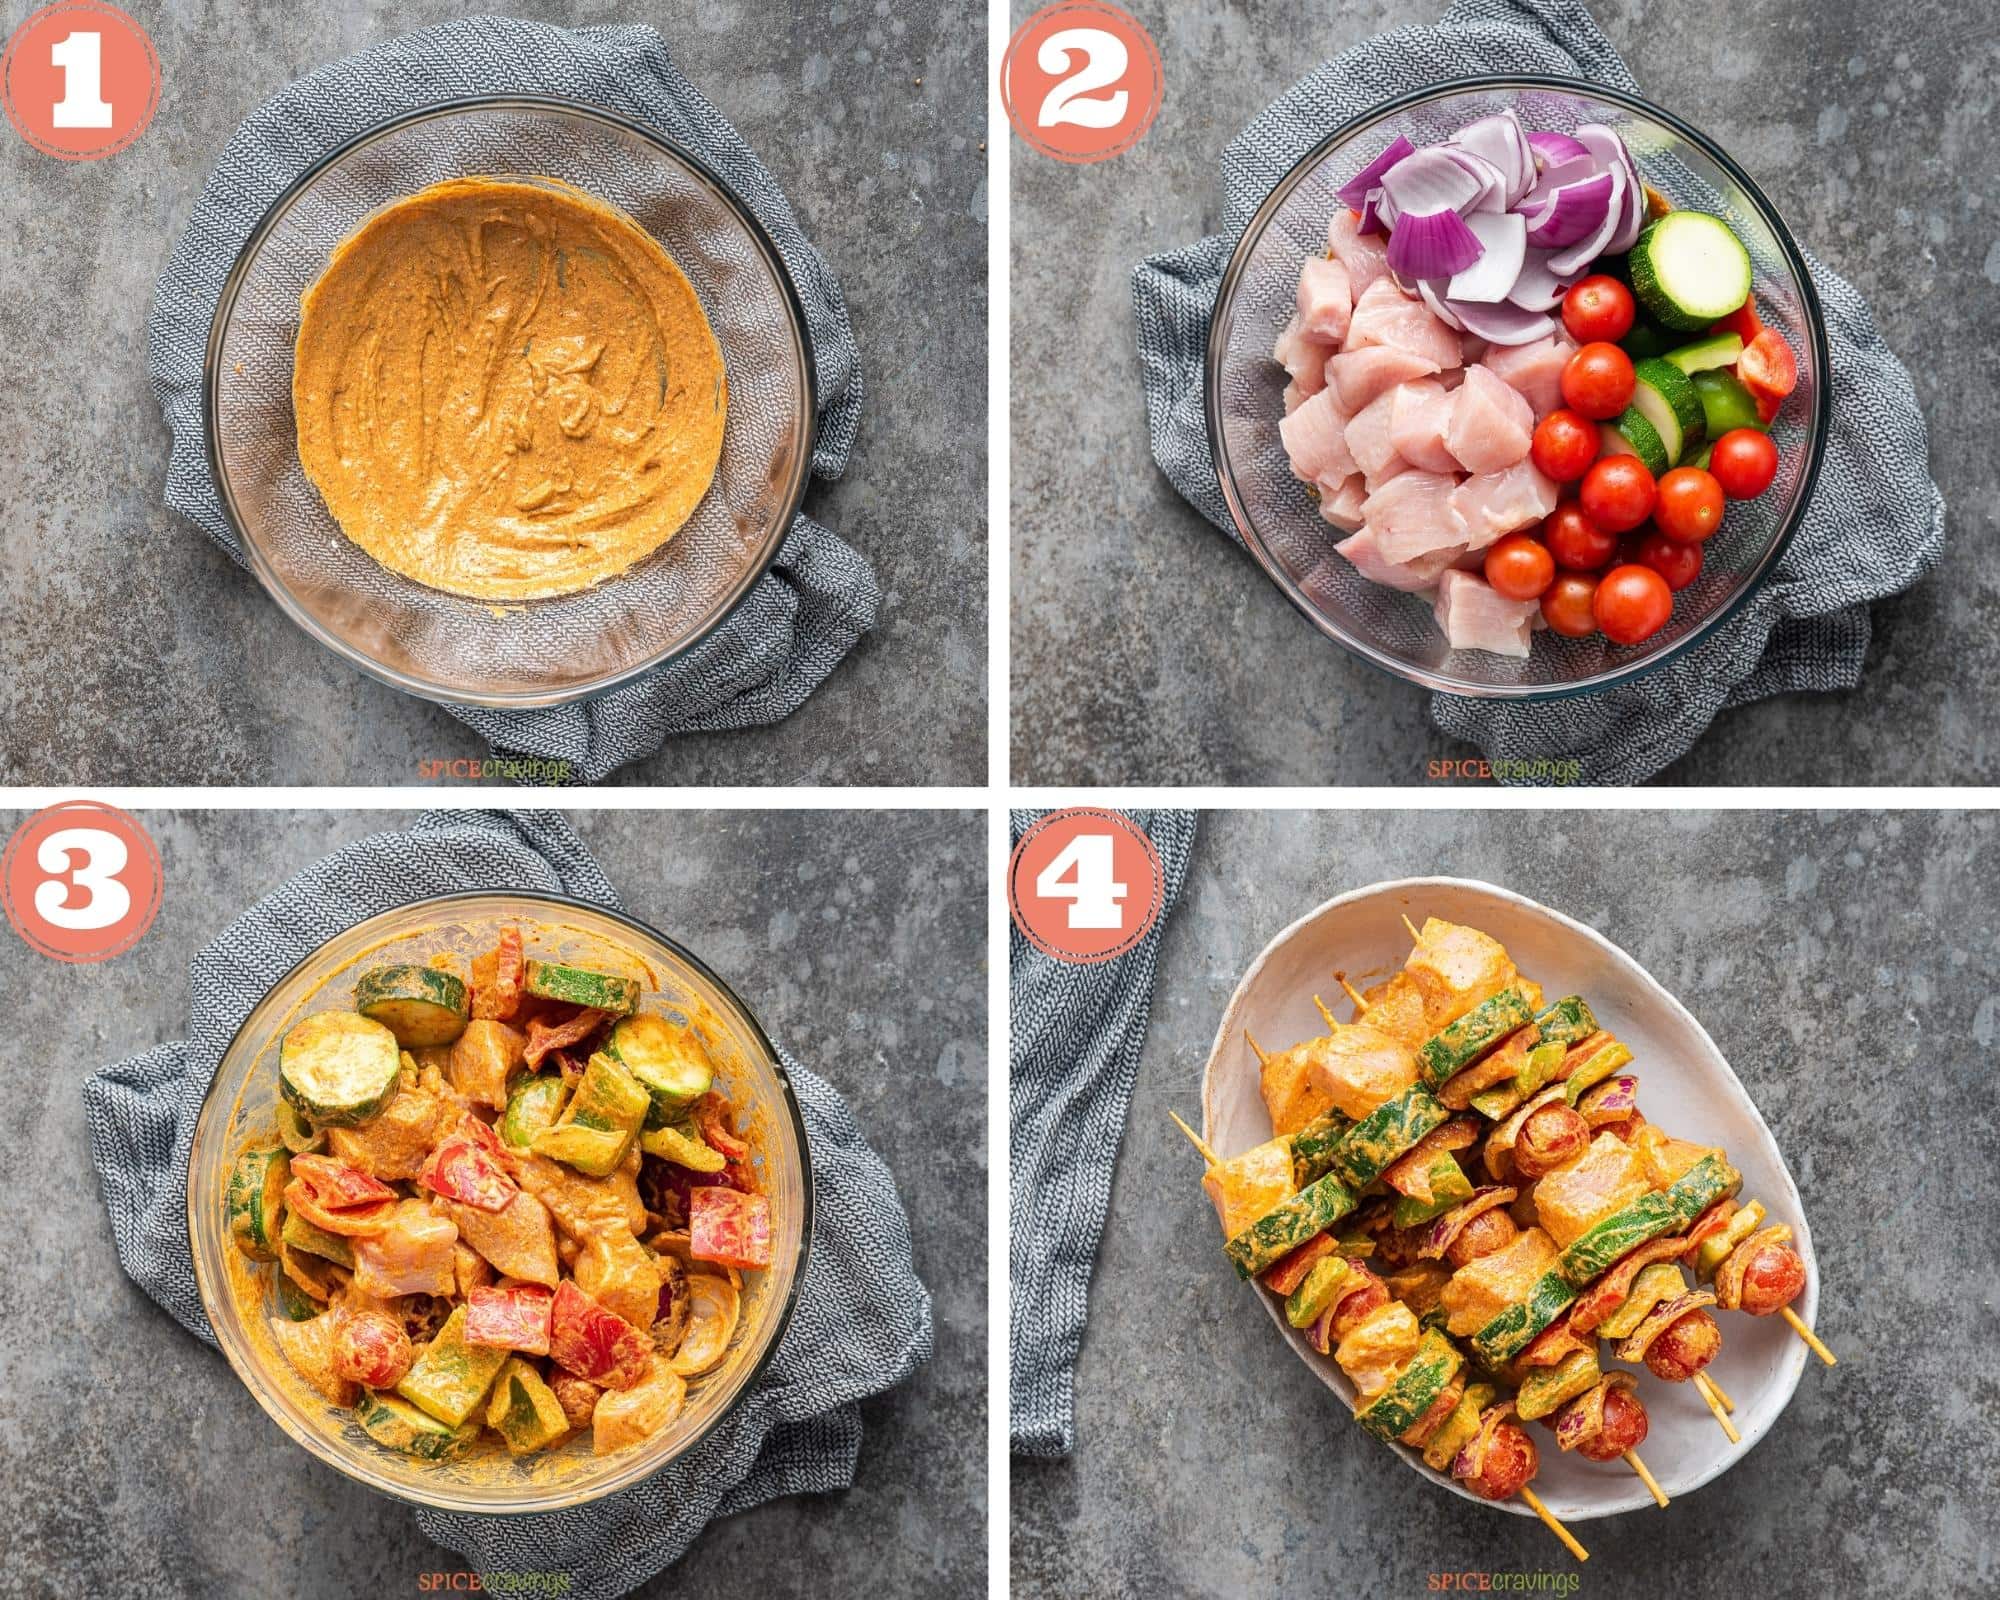 4-image grid showing how to marinate chicken and vegetables